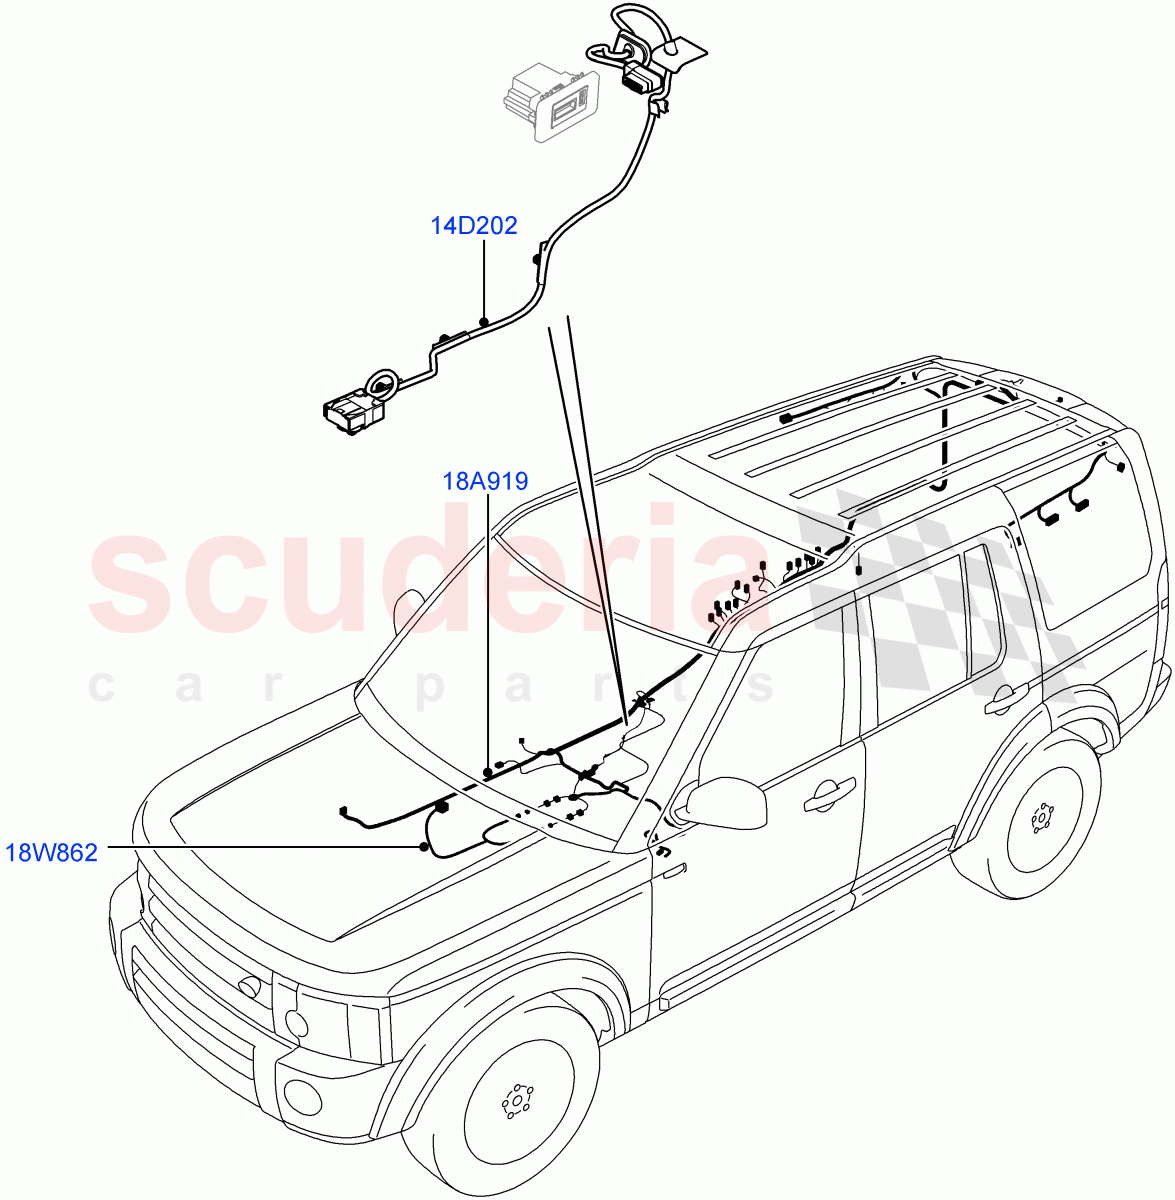 Electrical Wiring - Body And Rear(Audio/Navigation/Entertainment)((V)FROMAA000001,(V)TOAA999999) of Land Rover Land Rover Discovery 4 (2010-2016) [3.0 DOHC GDI SC V6 Petrol]